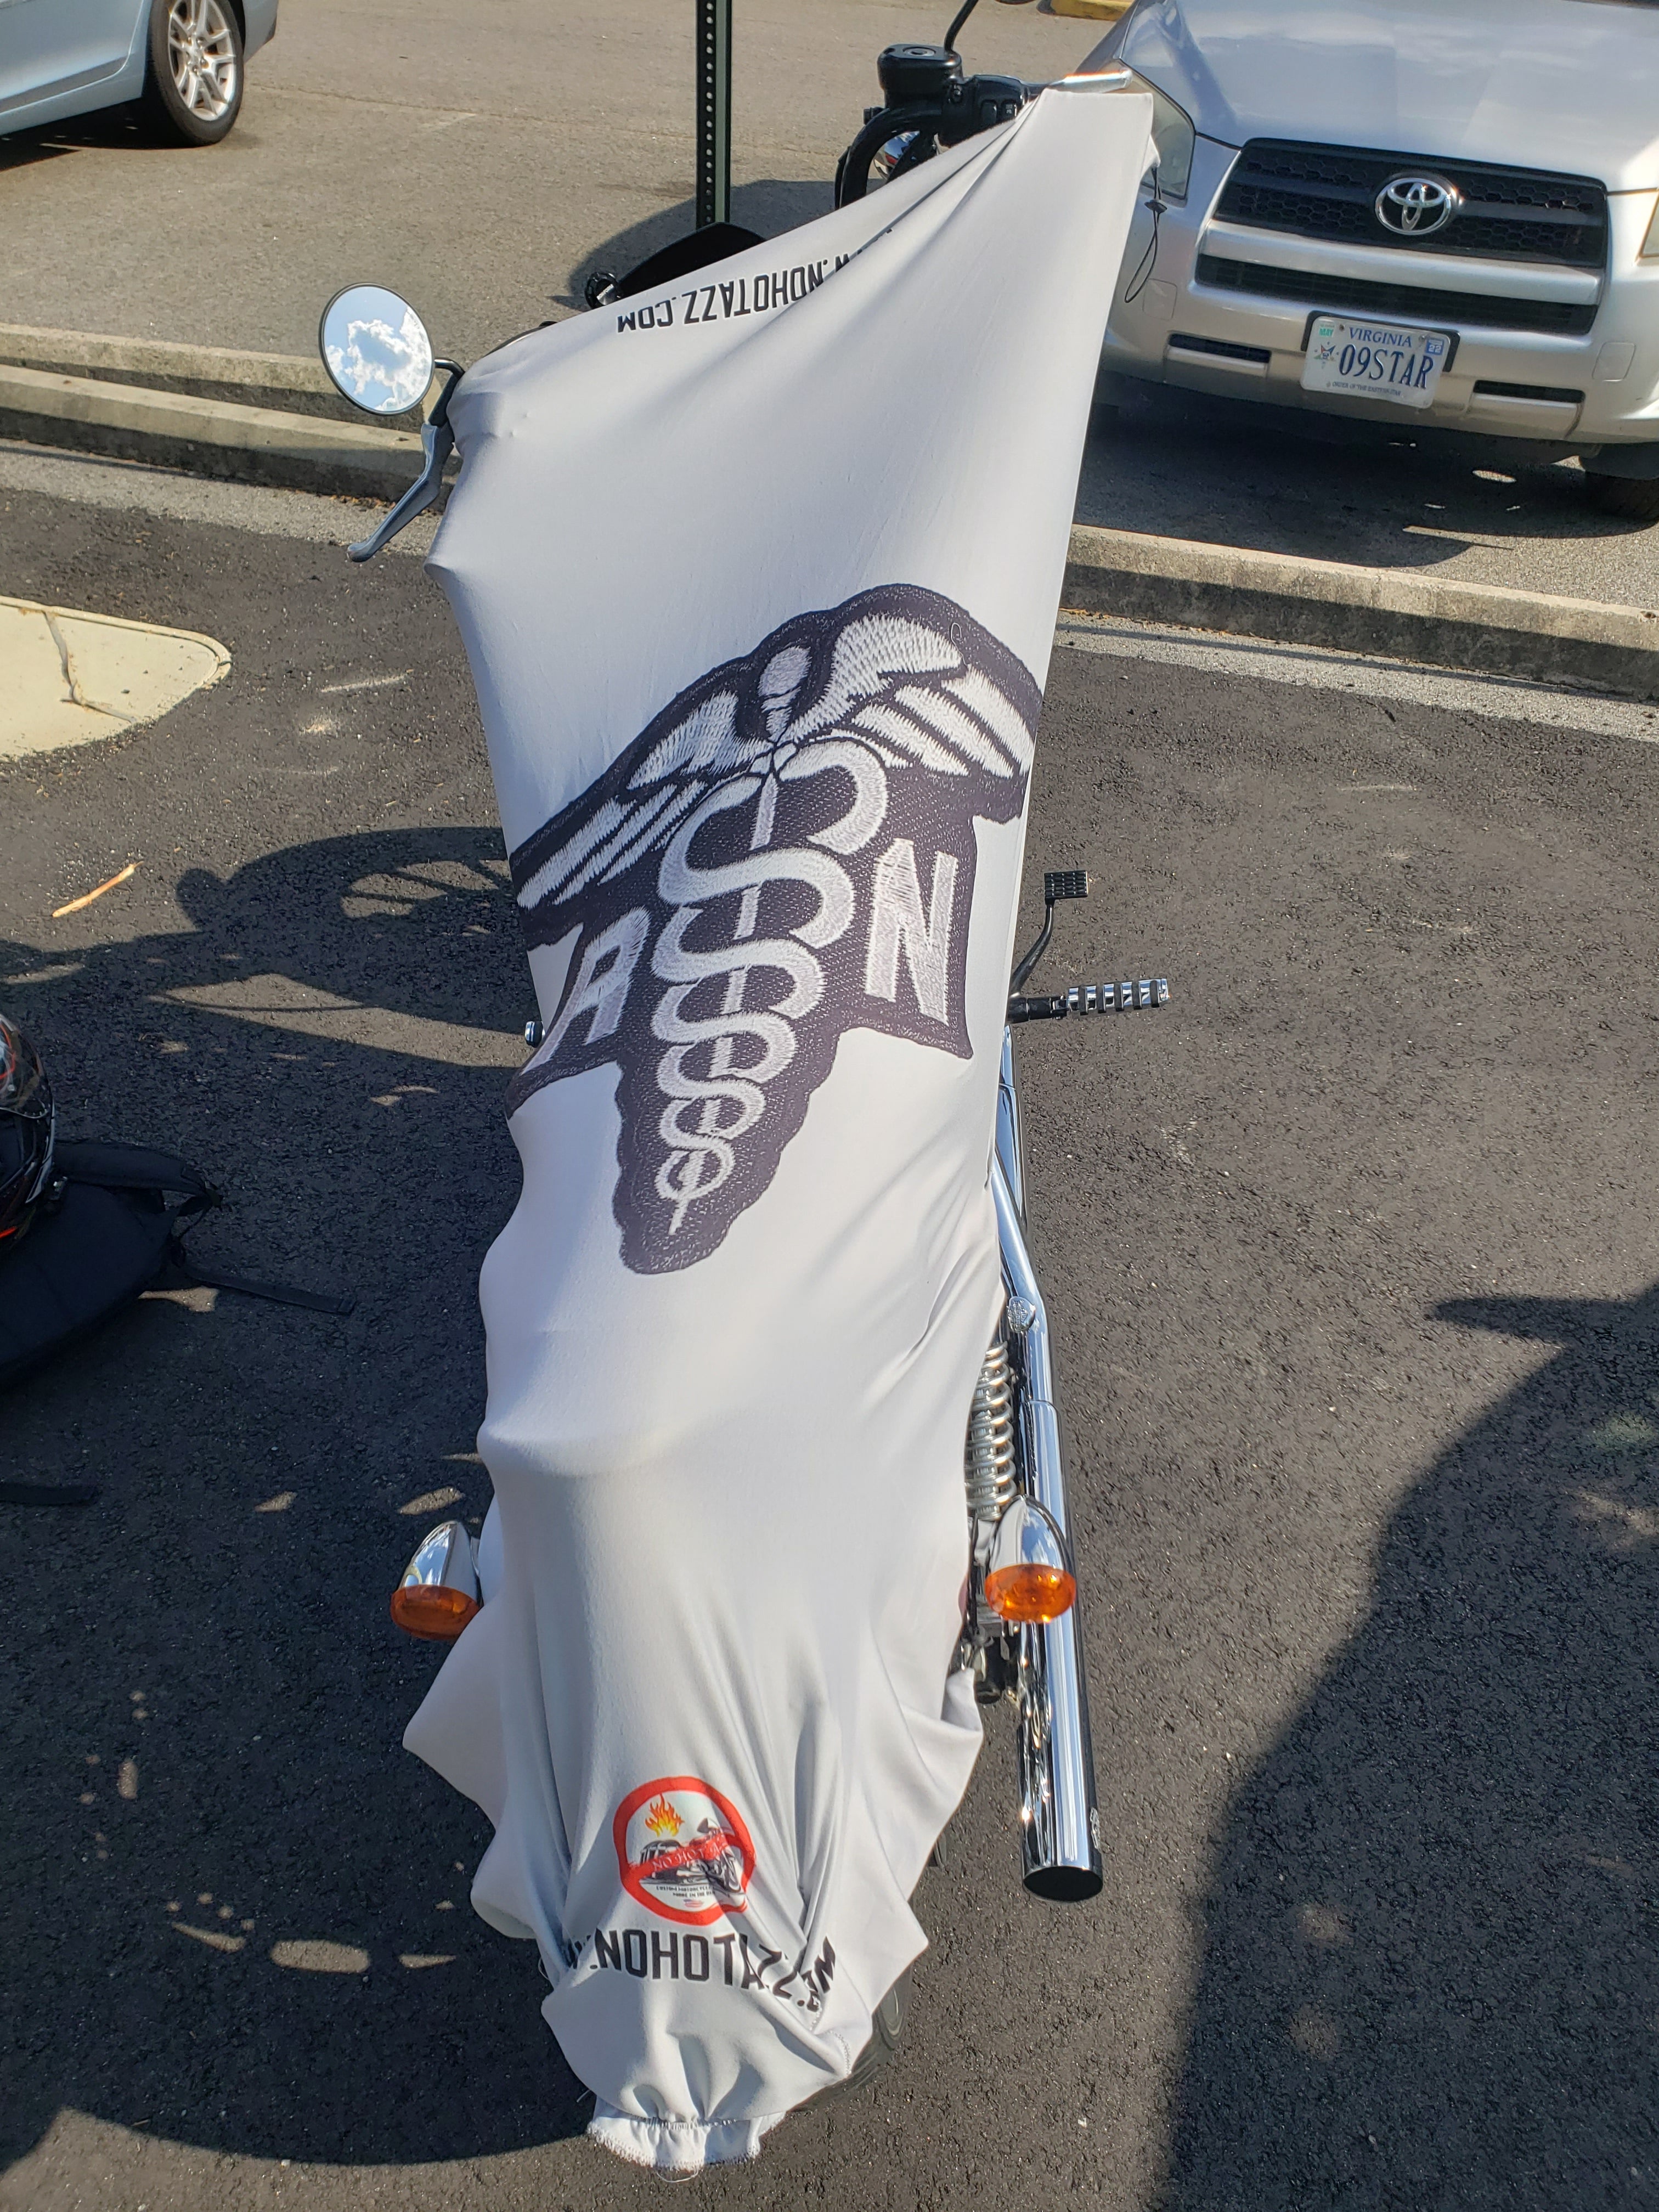 A rear view of a white No Hot Azz motorcycle seat shade sun cover on a motorcycle in a parking lot featuring a registered nurse patch.